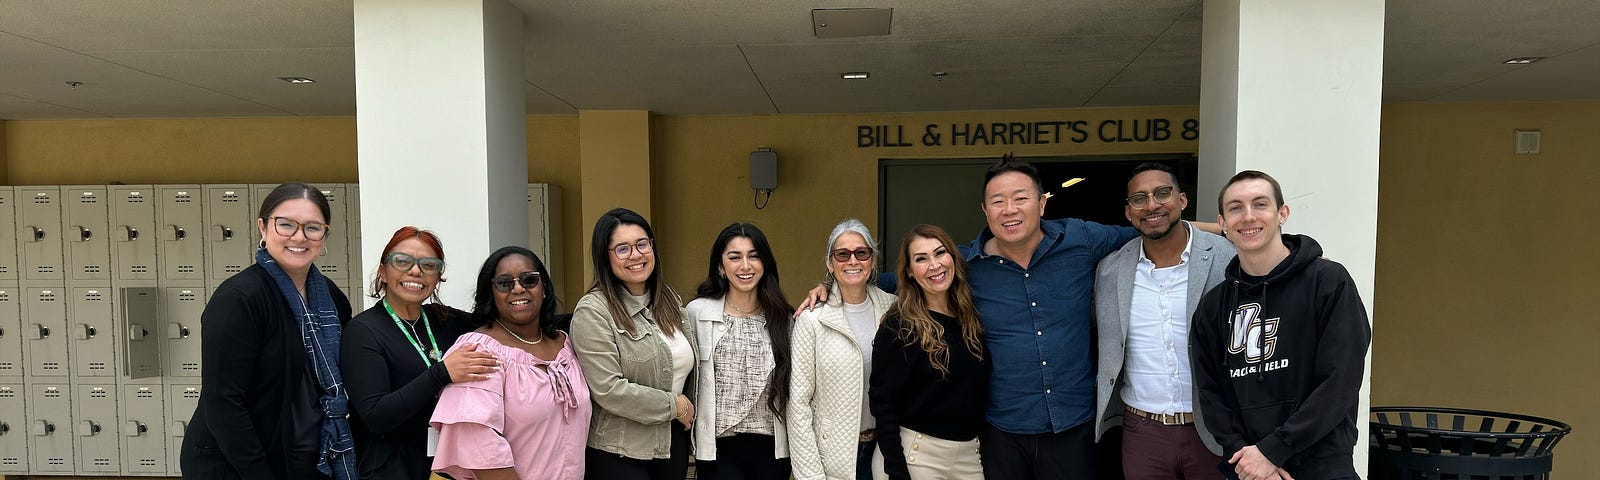 A group picture of faculty from Seton Hall University, Whittier College, and graduating seniors earning a BA in Social Work who joined the information session outside of Club 88